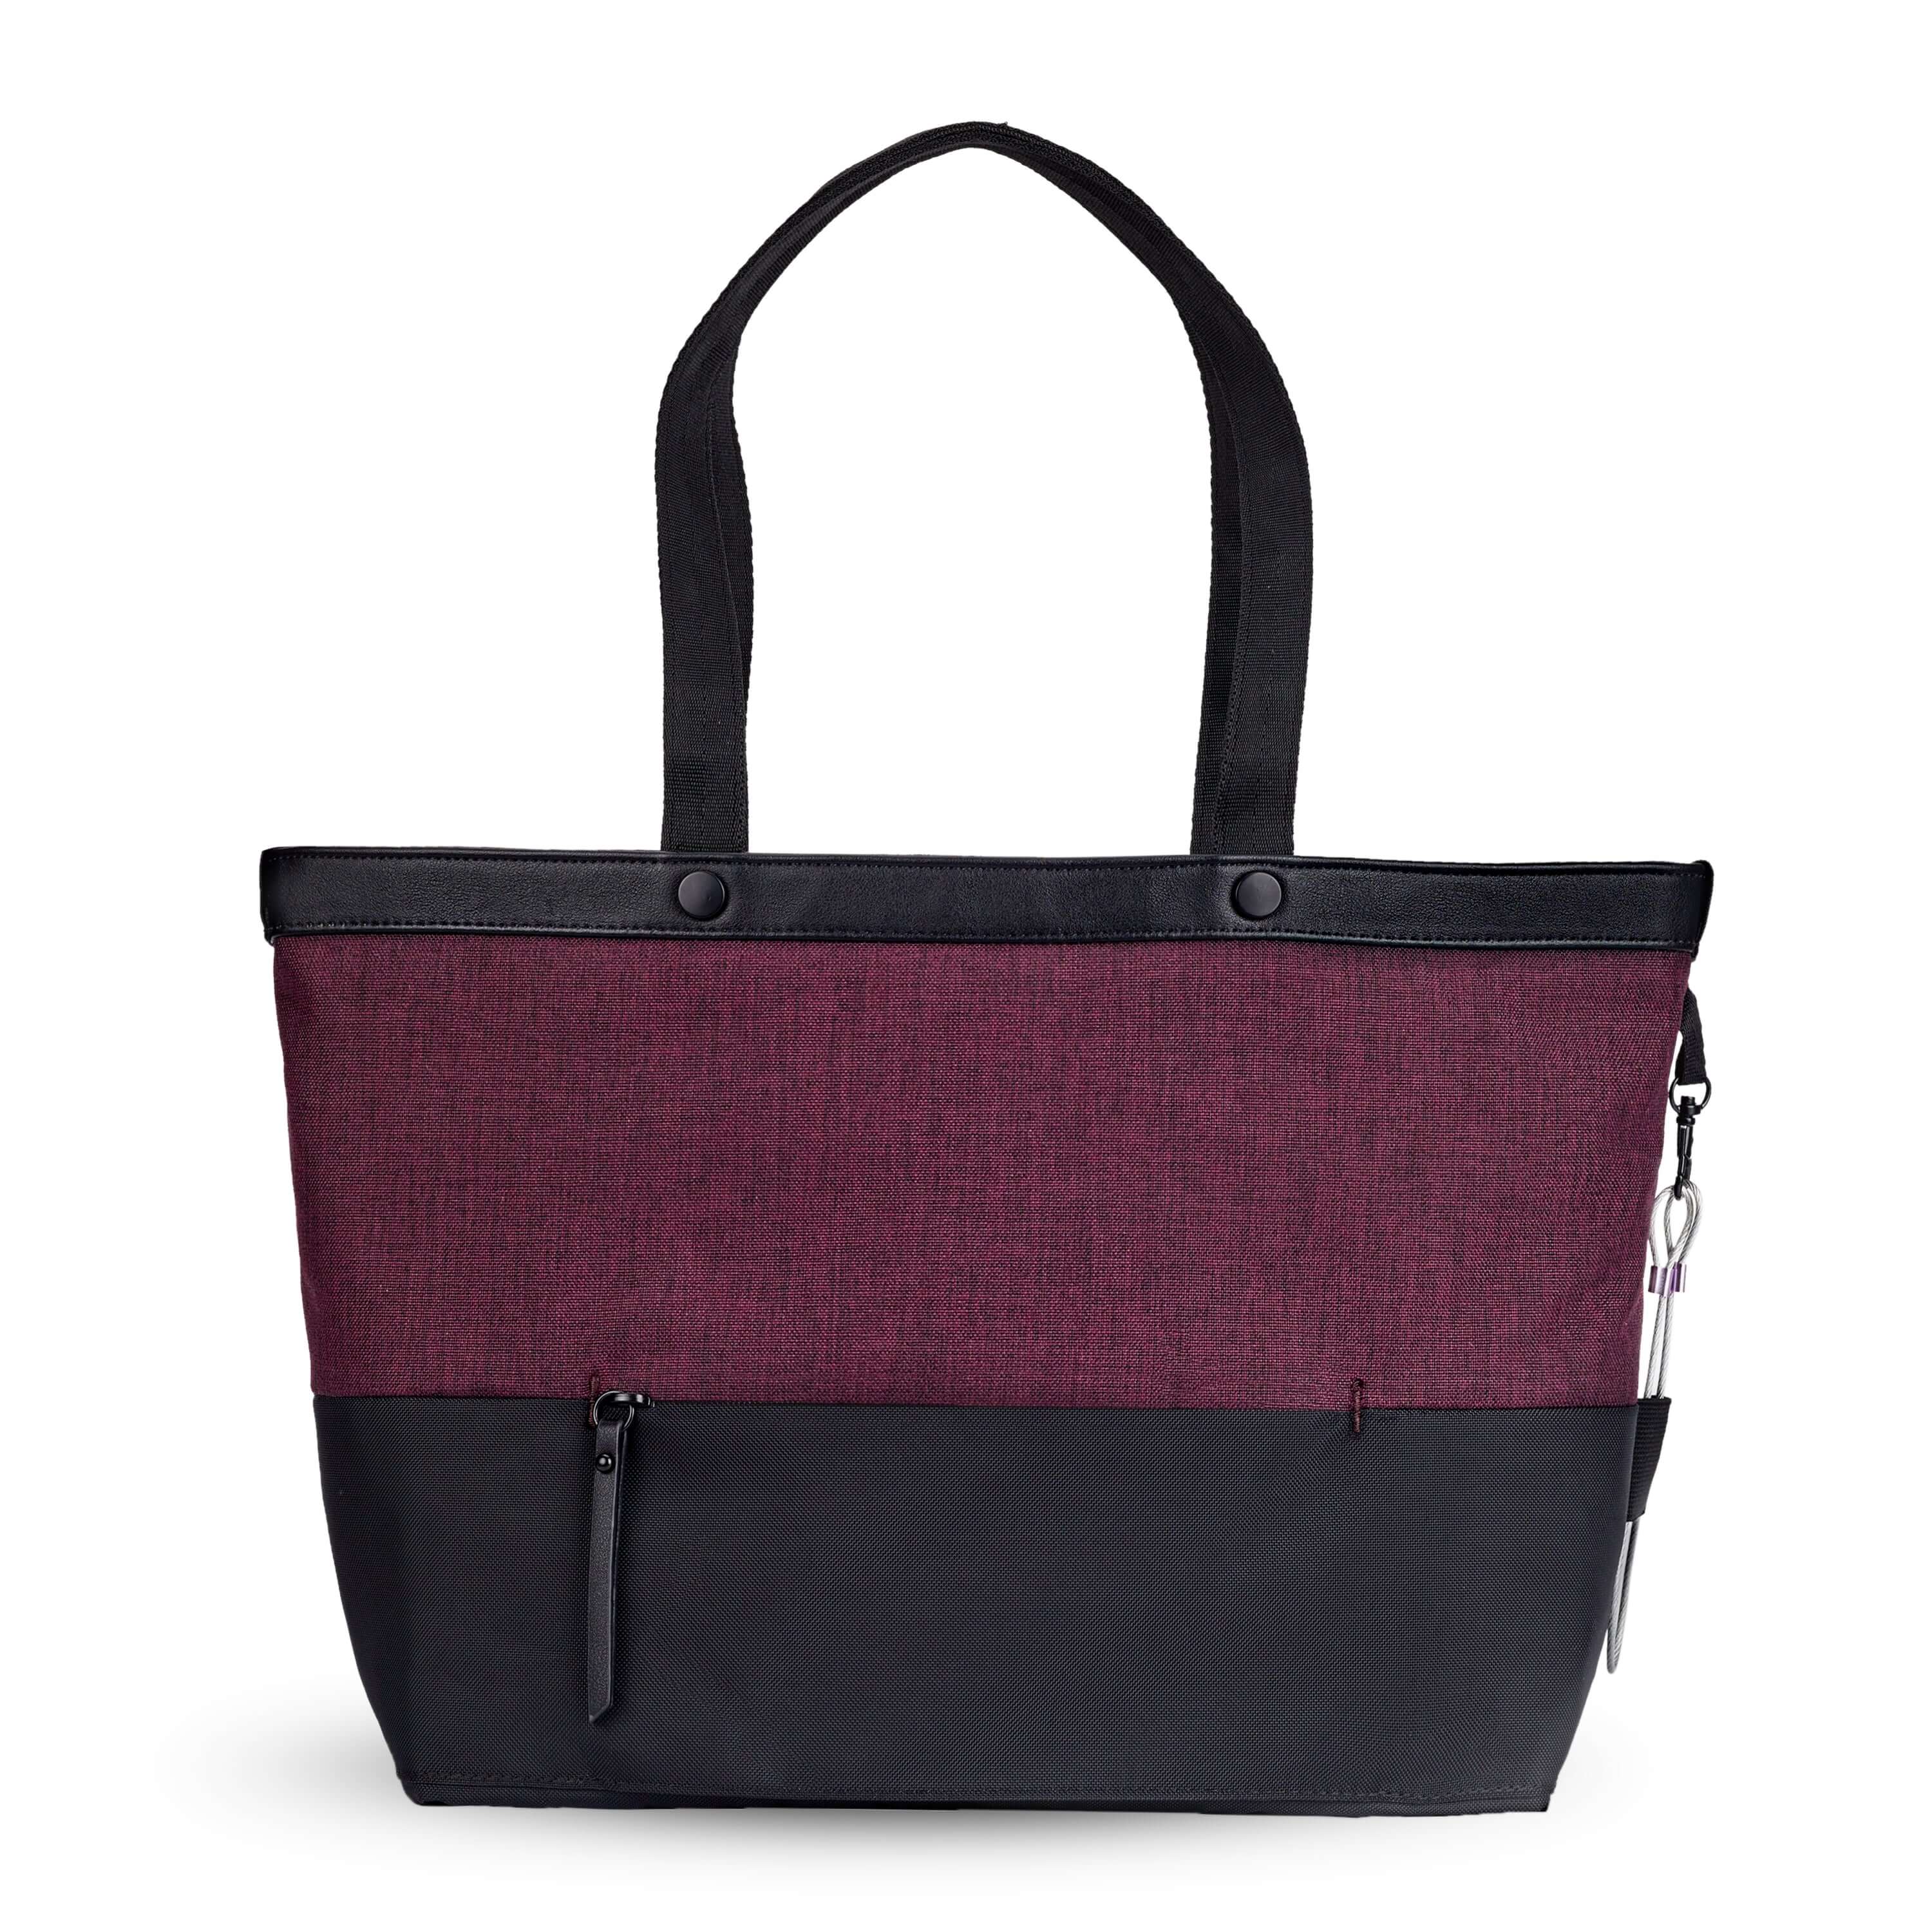 Back view of Sherpani&#39;s Anti-Theft tote, the Cali AT in Merlot, with vegan leather accents in black. There is a zipper compartment that acts as a luggage pass-through or trolley sleve, and a chair loop lock on one side that is secured by an elastic tab.